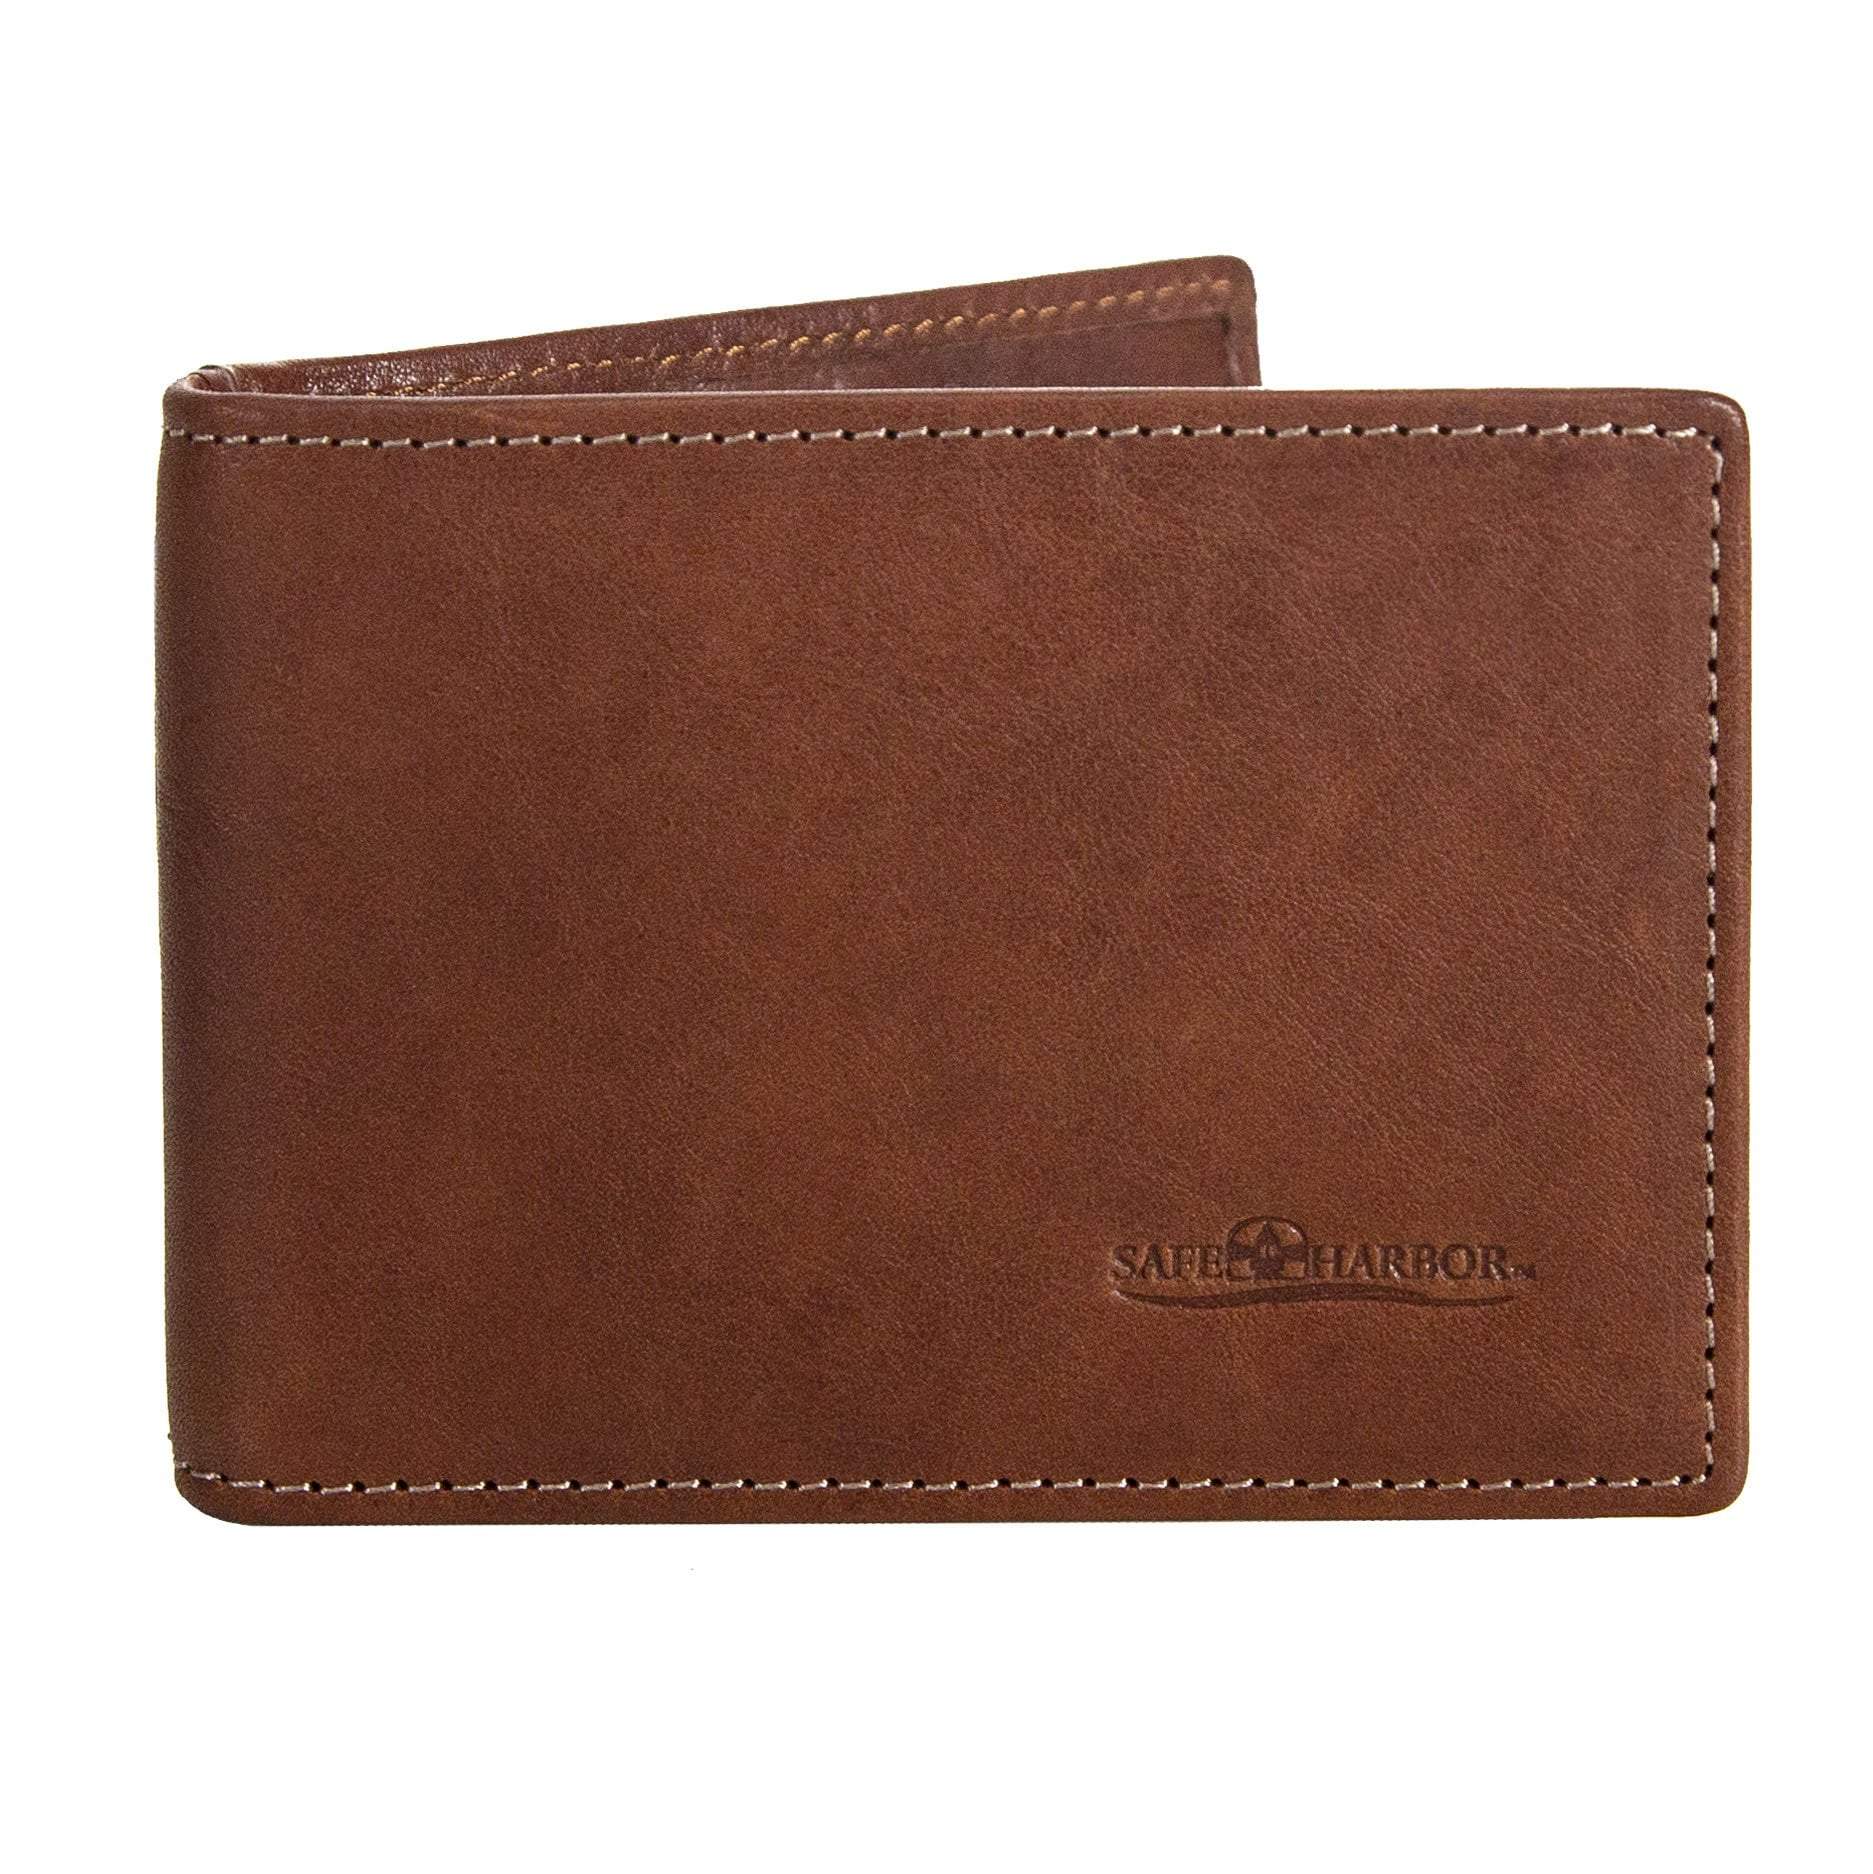 ID Stronghold RFID Blocking Leather Wallet